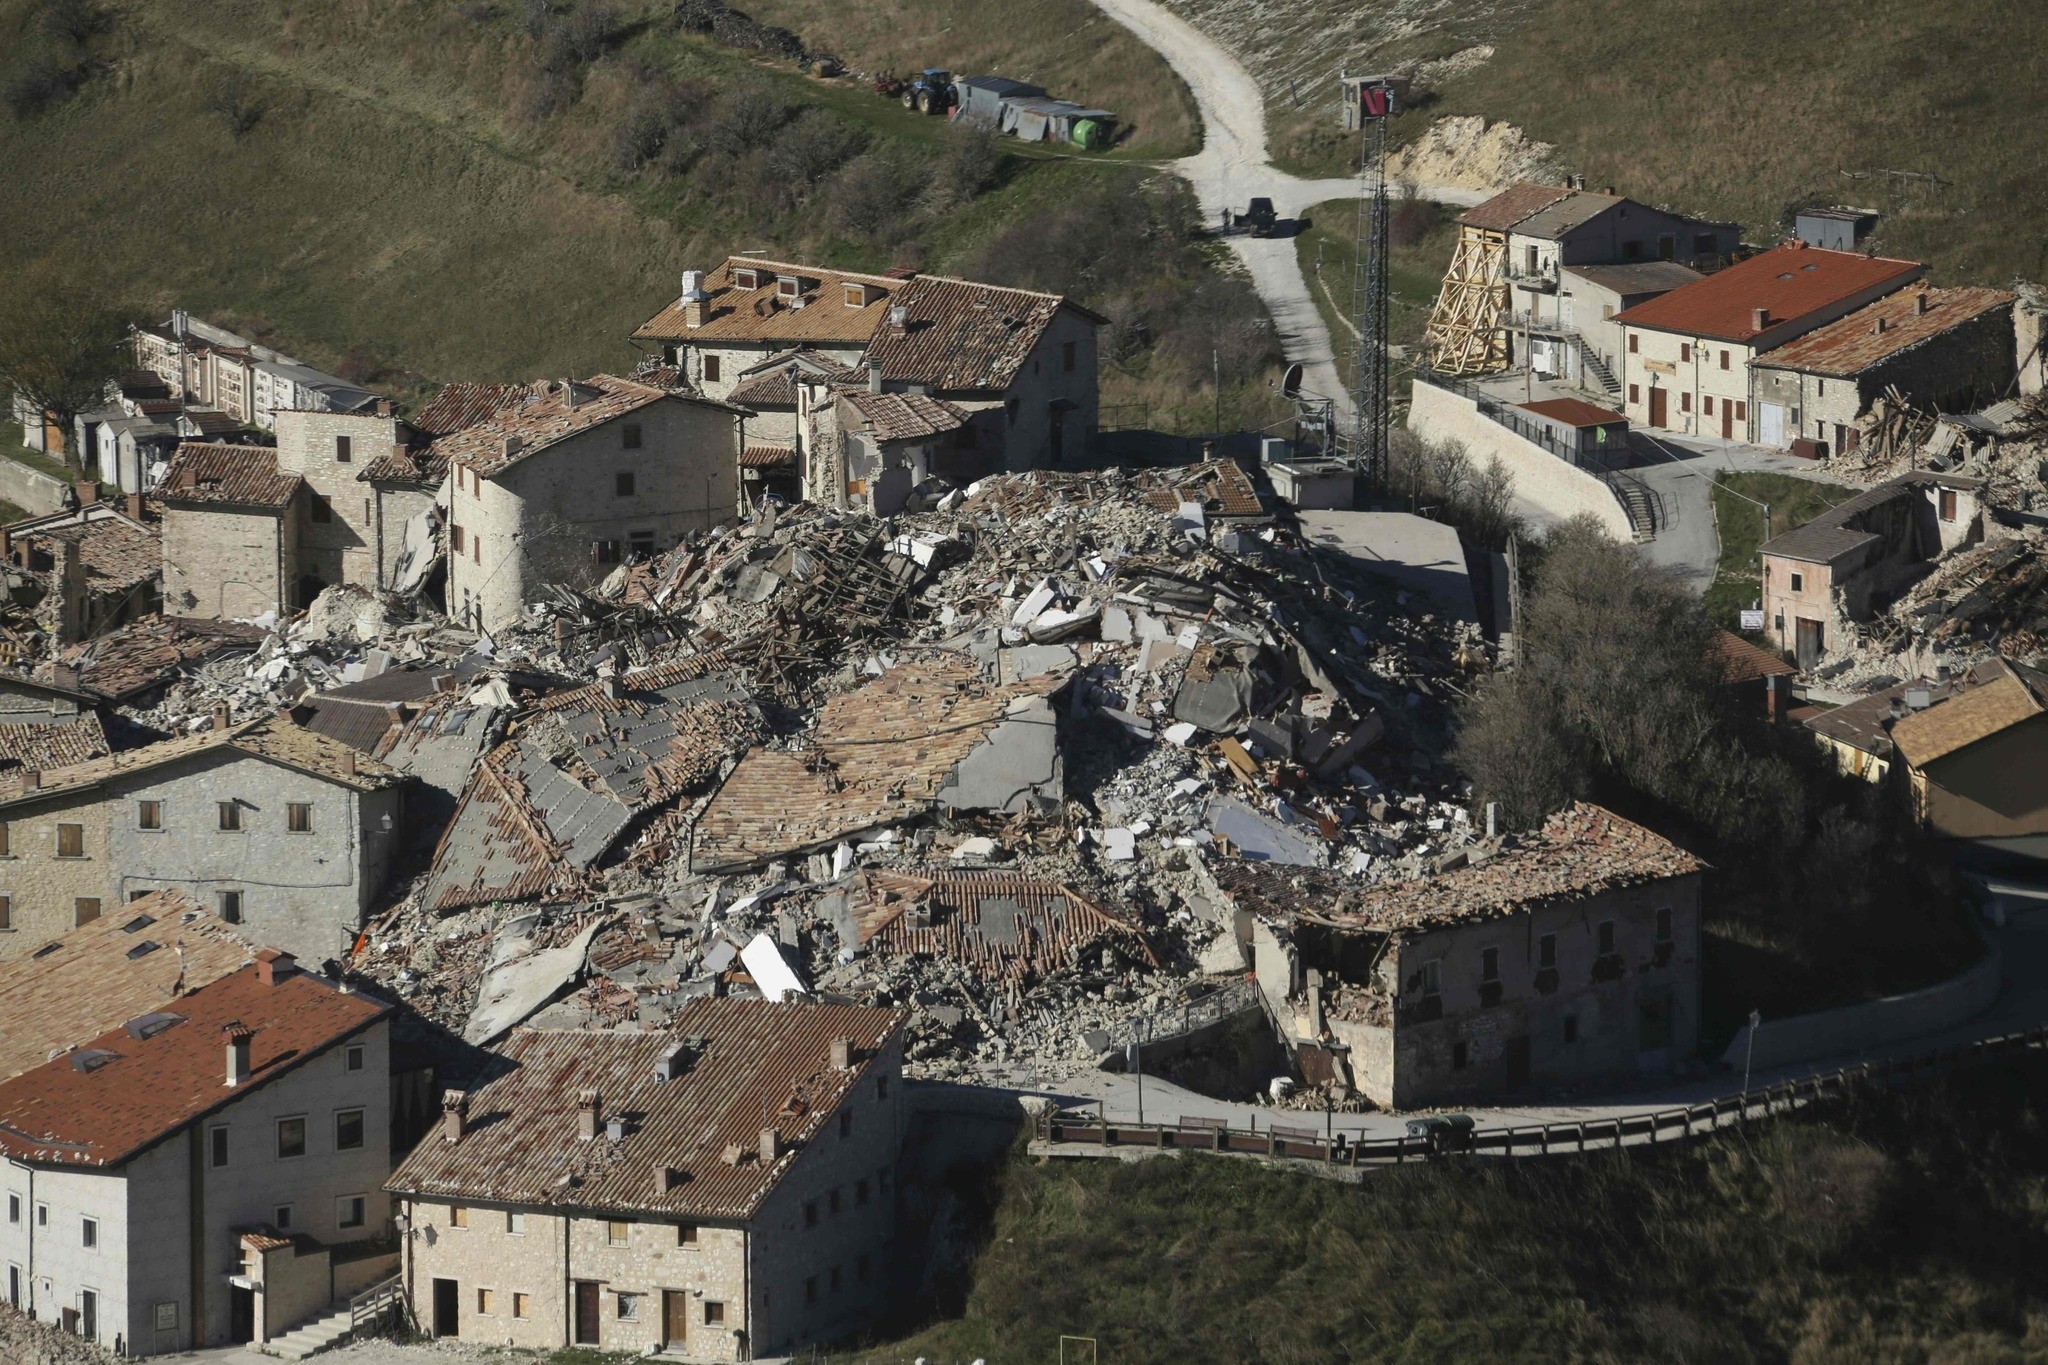 An aerial view of the destructions in the village of Castelluccio, after a 6.5 magnitude earthquake on October 30, 2016 in Central Italy, near Norcia. (AFP Photo)